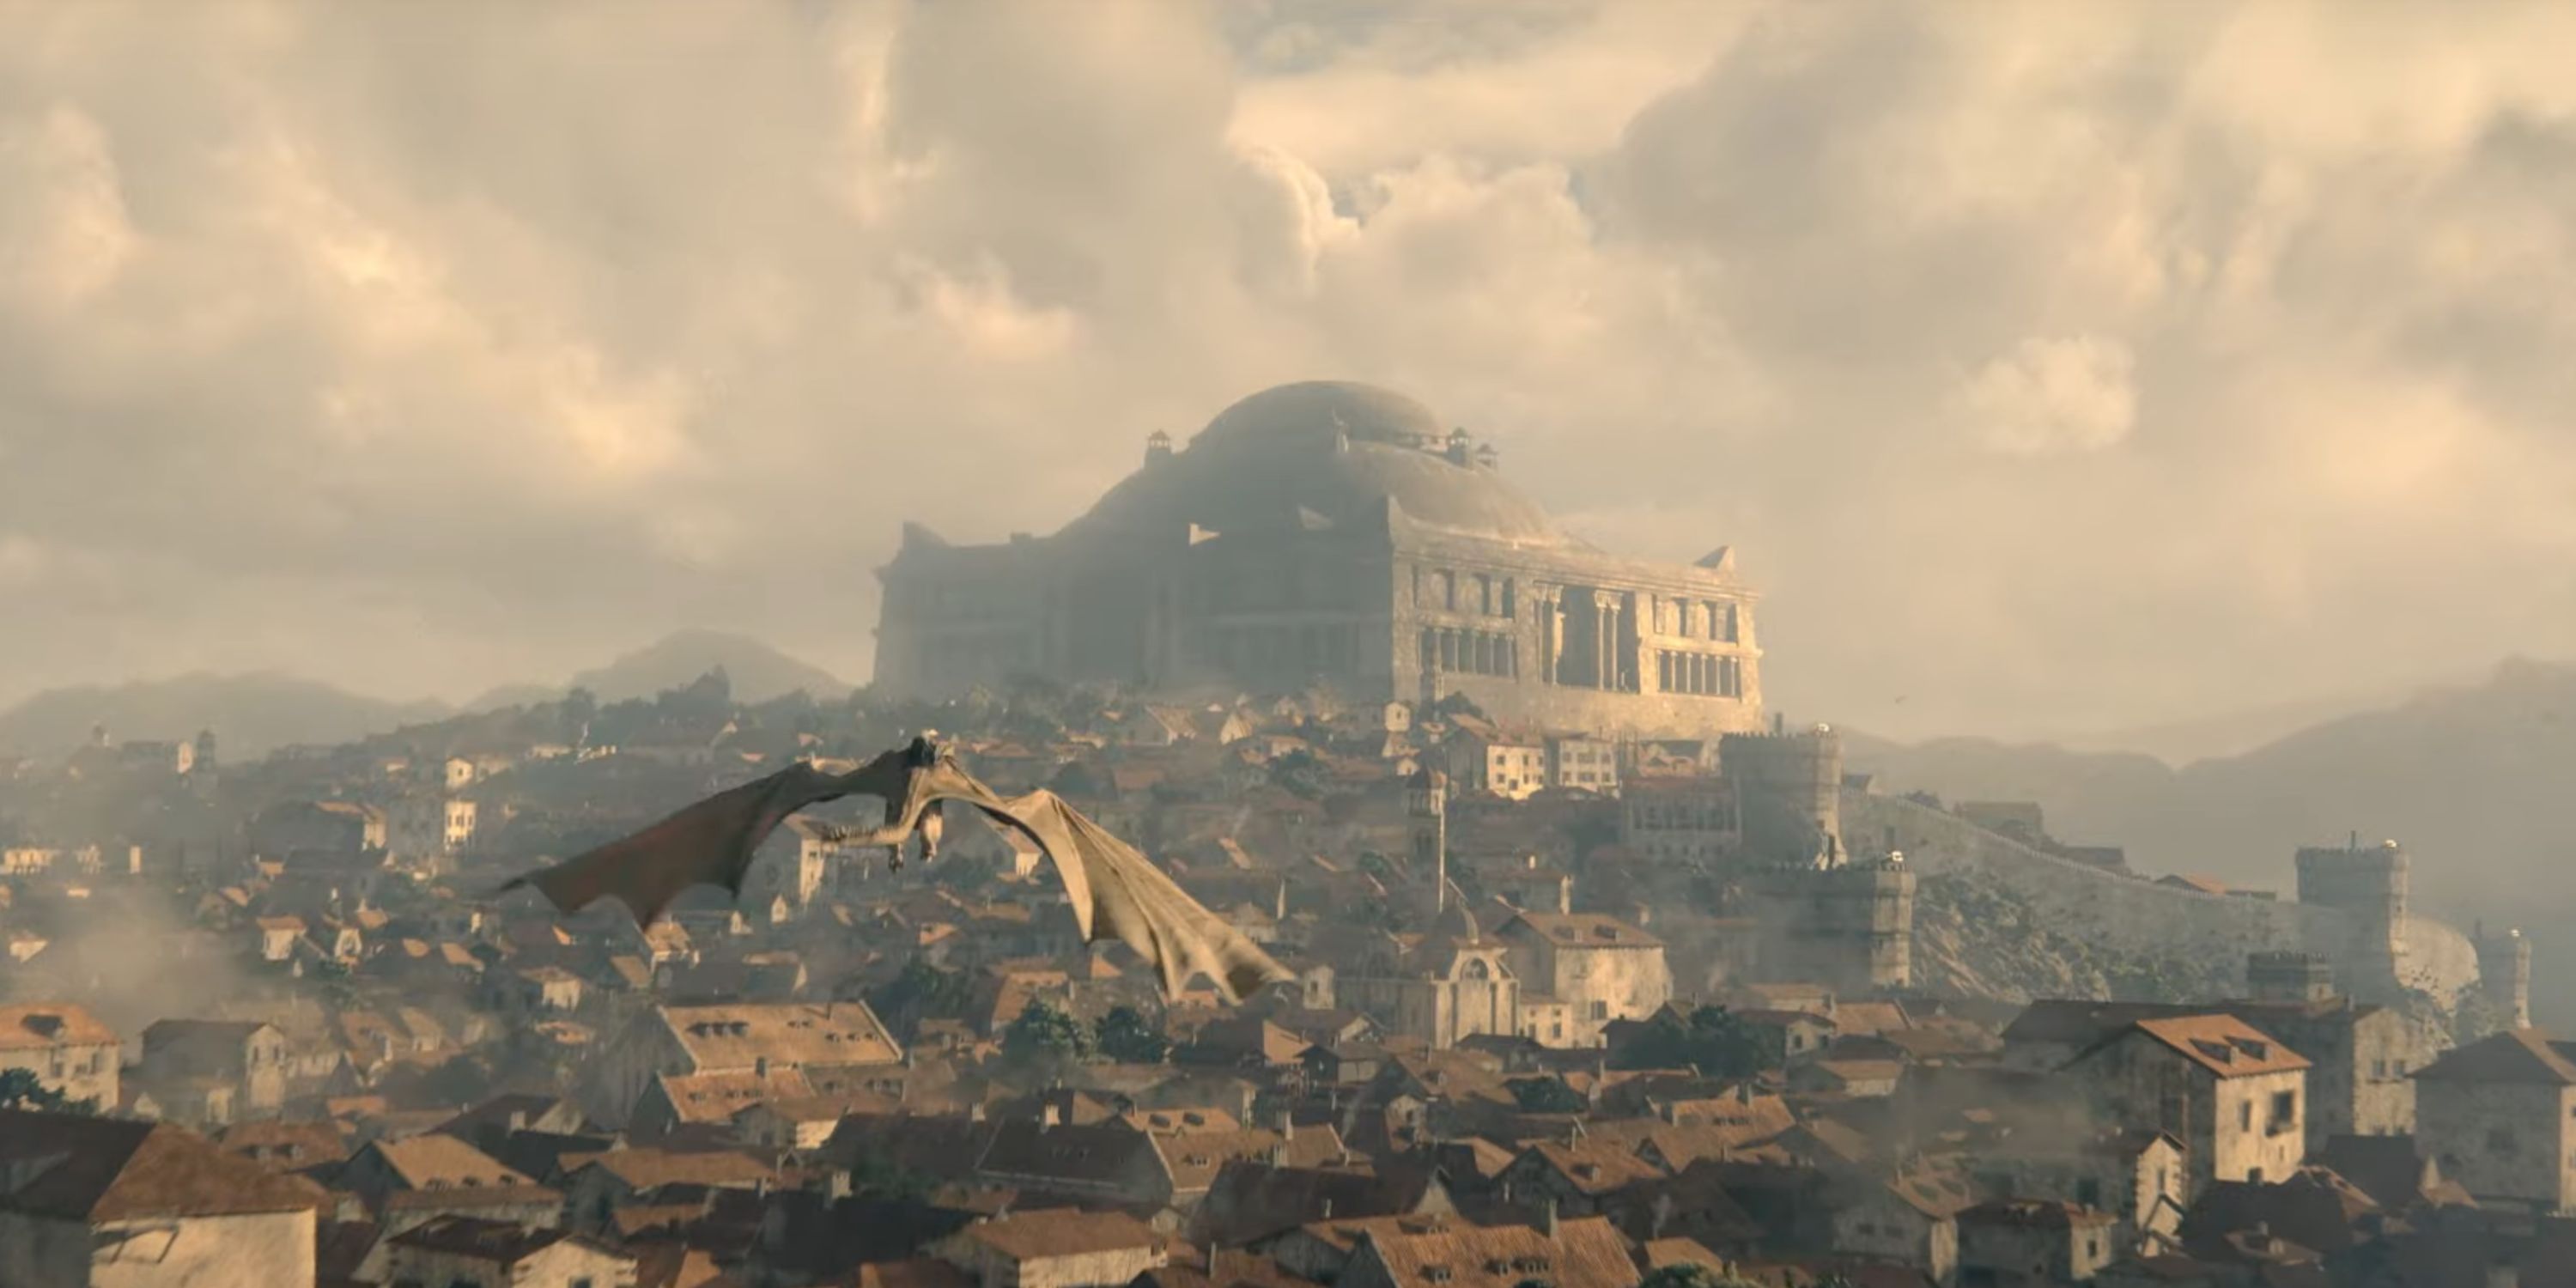 Dragon Pit in House of the Dragon trailer